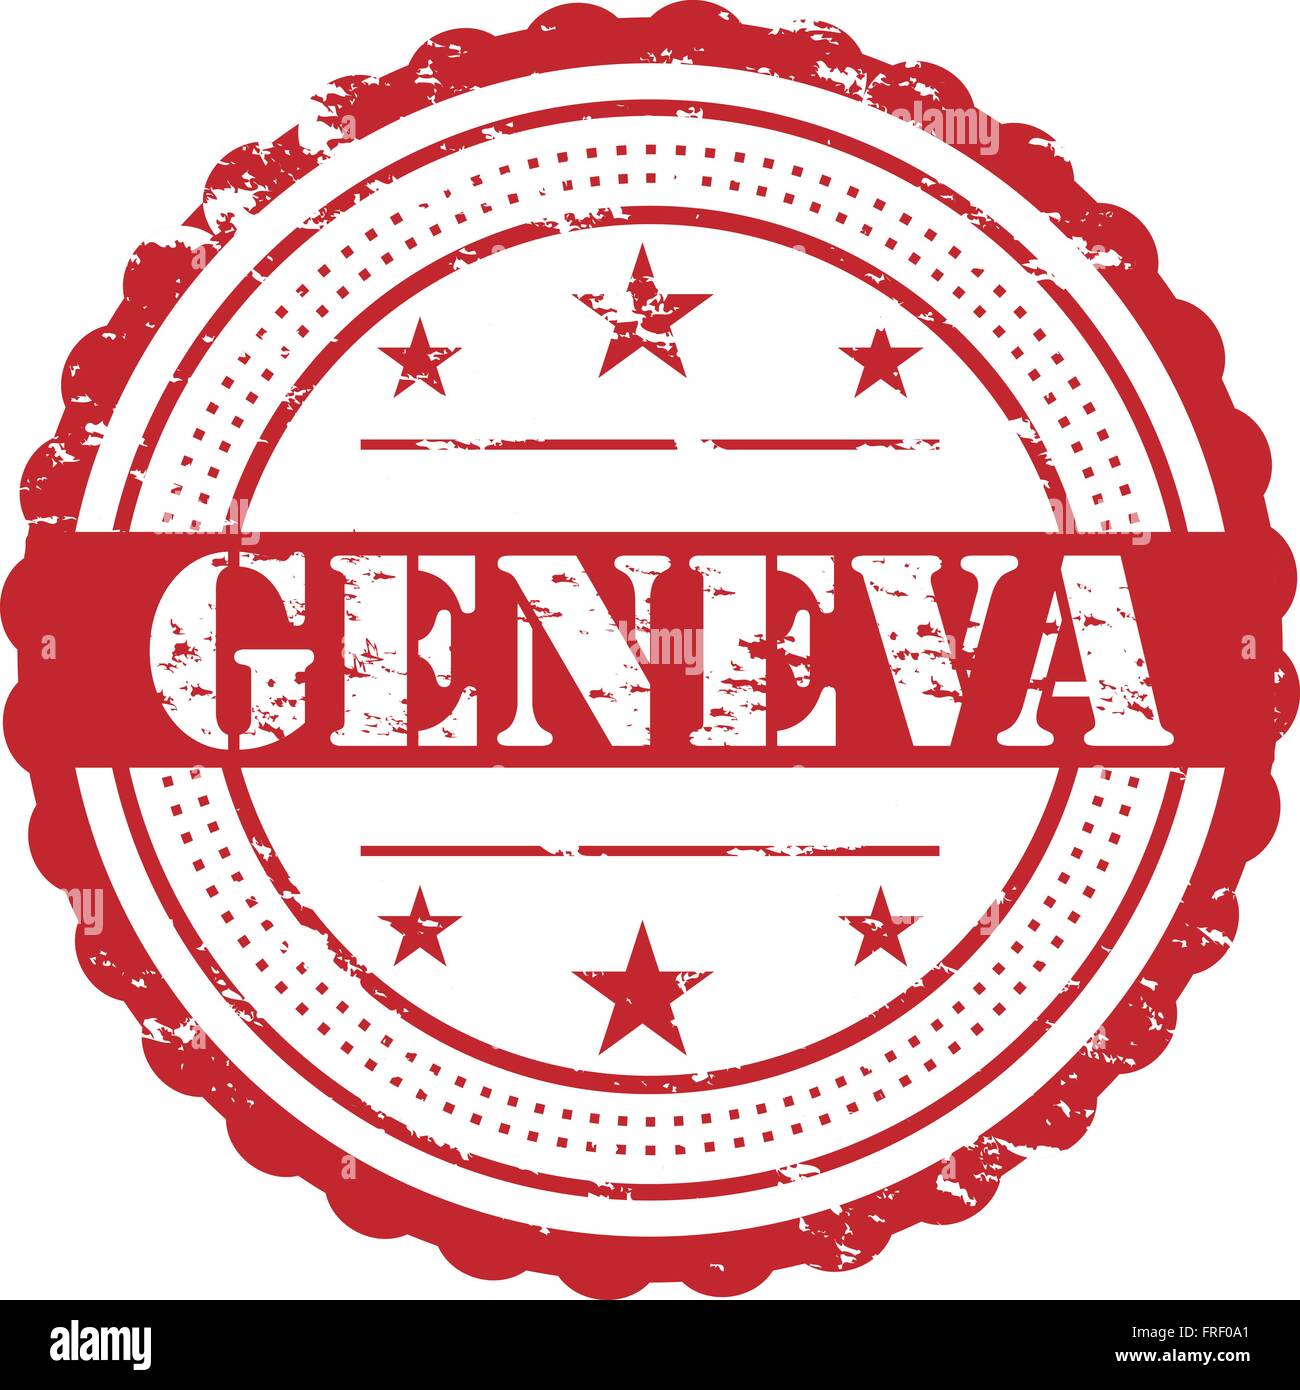 The meaning of the coat of arms on the Geneva Seal